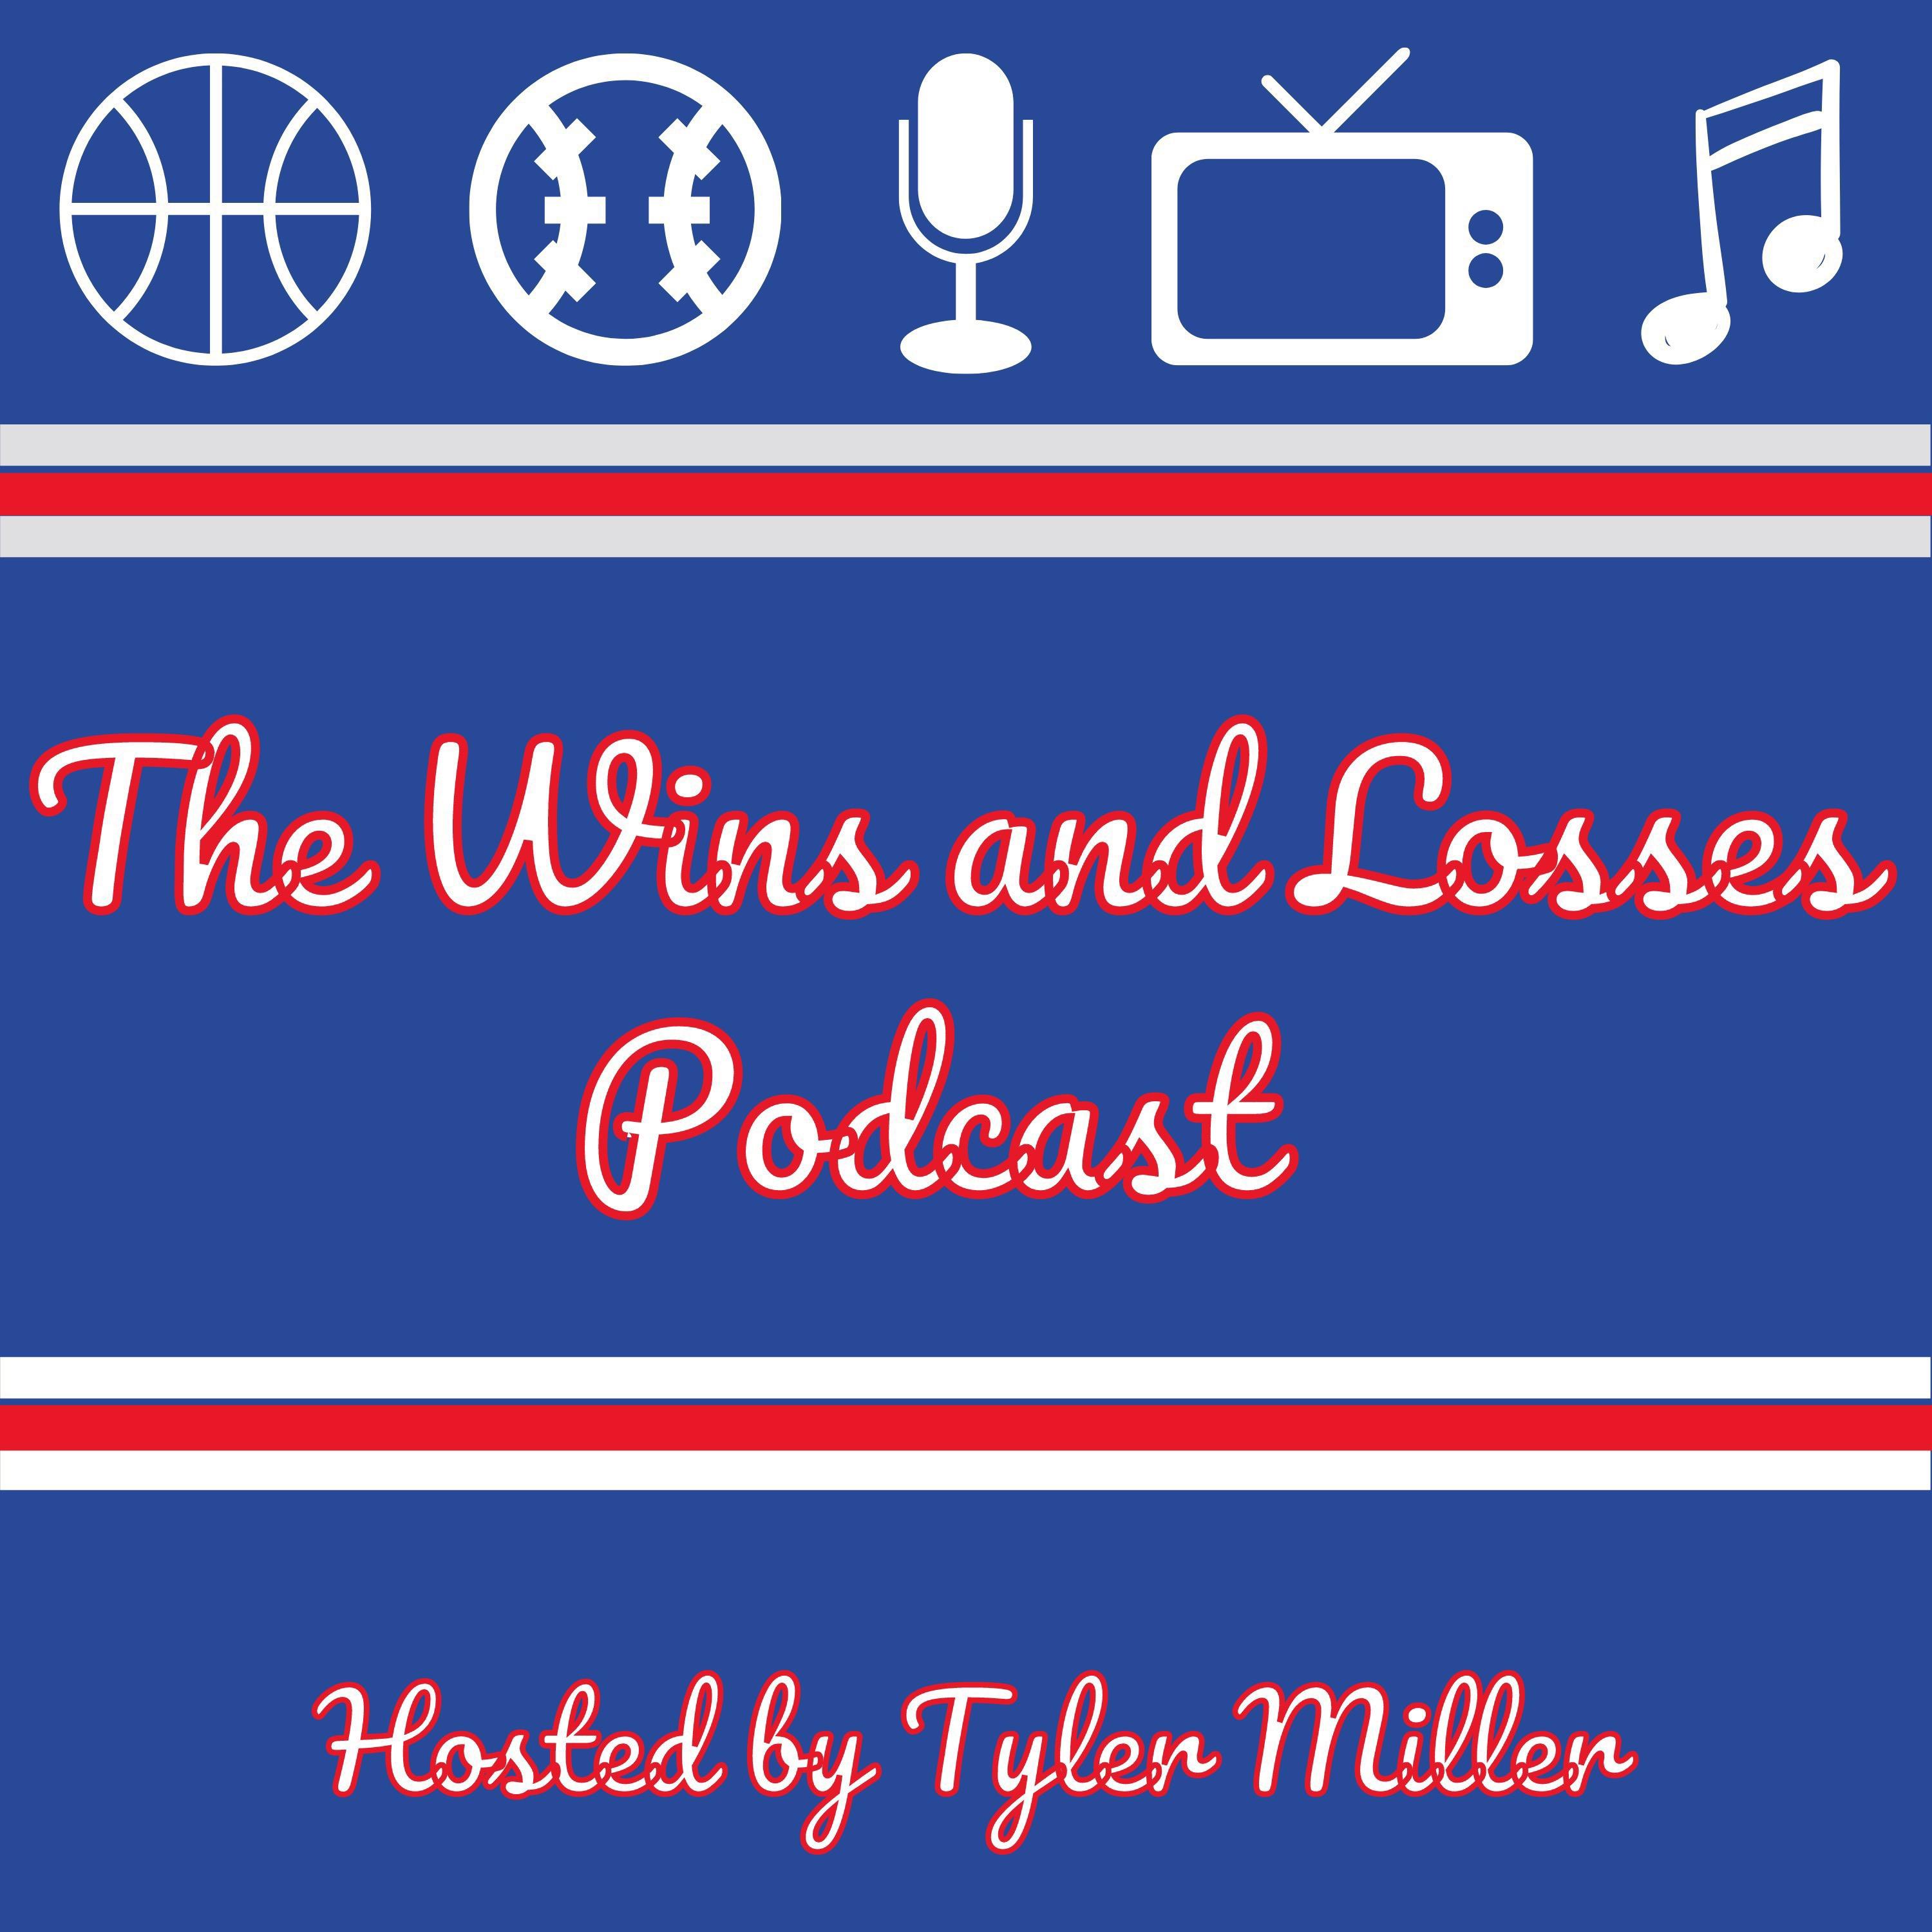 The Wins and Losses Podcast